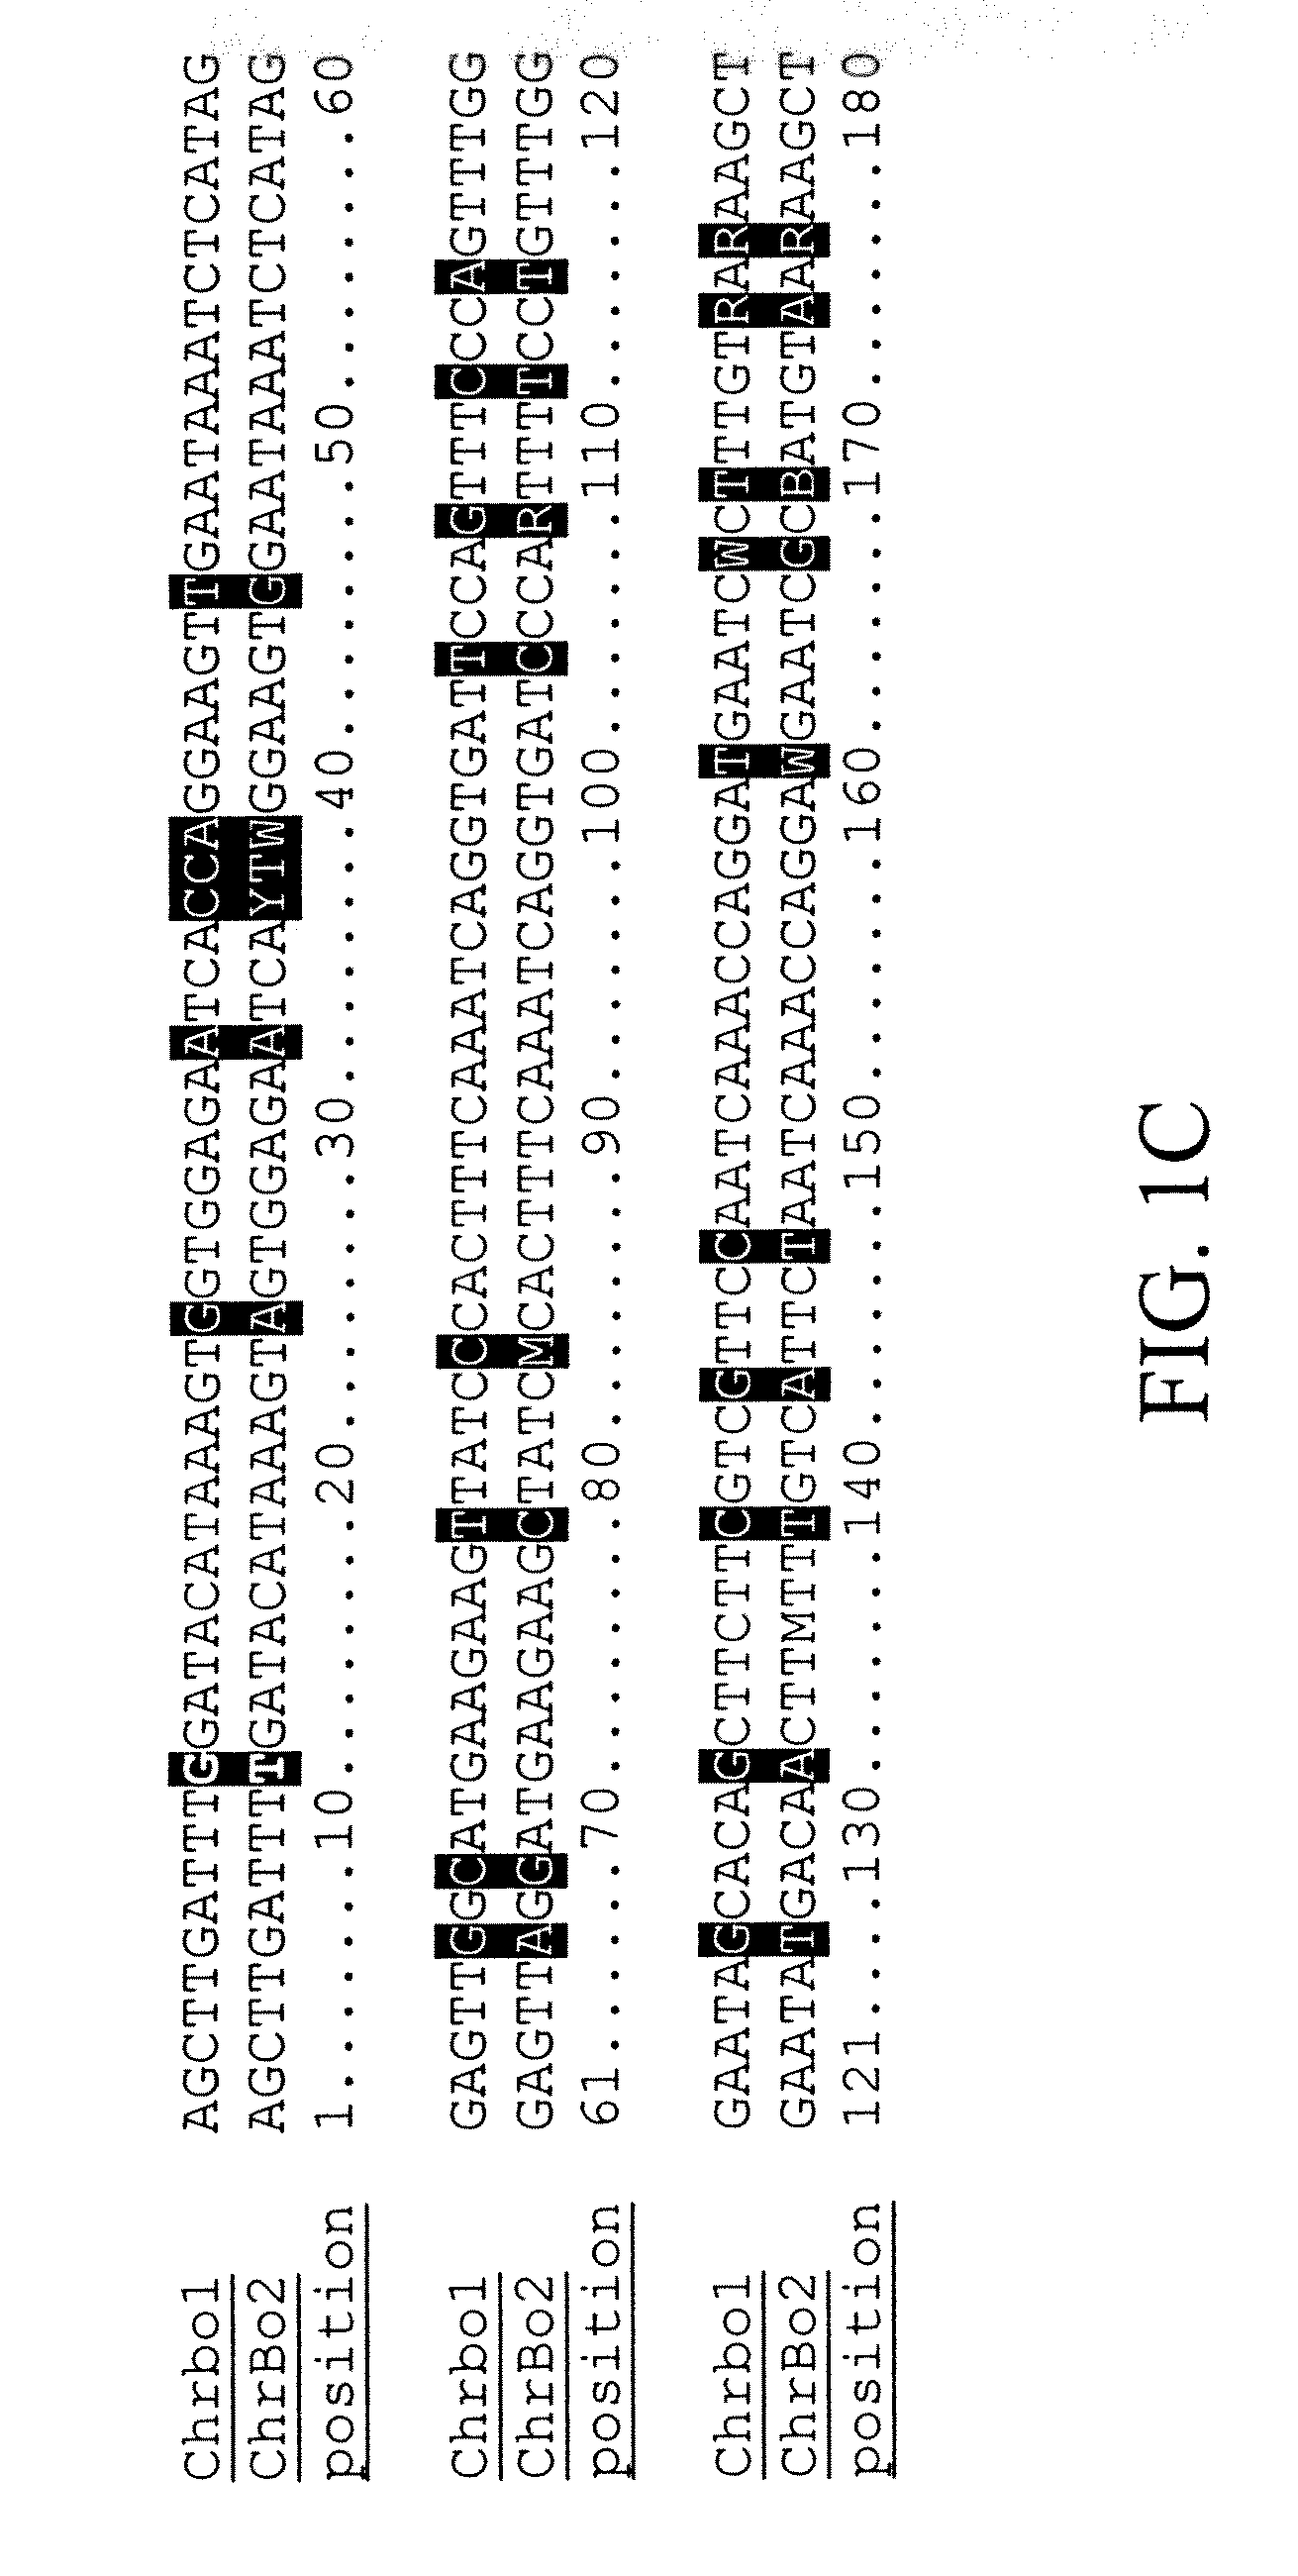 Methods for generation or increasing revenues from crops